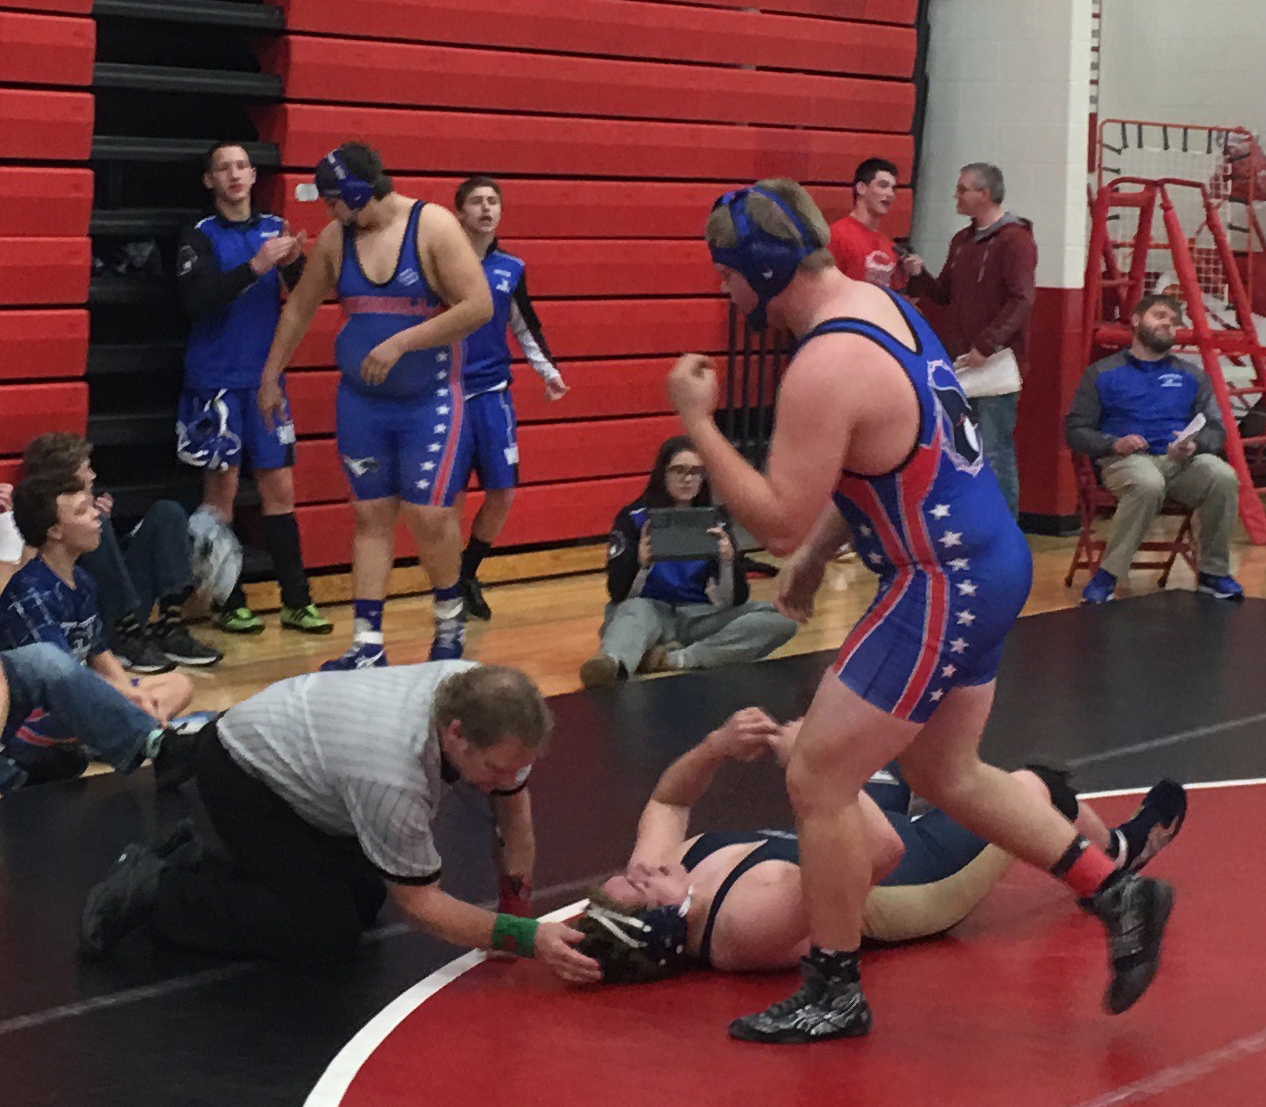 Bluejay grapplers place 4th at Papermaker Invite